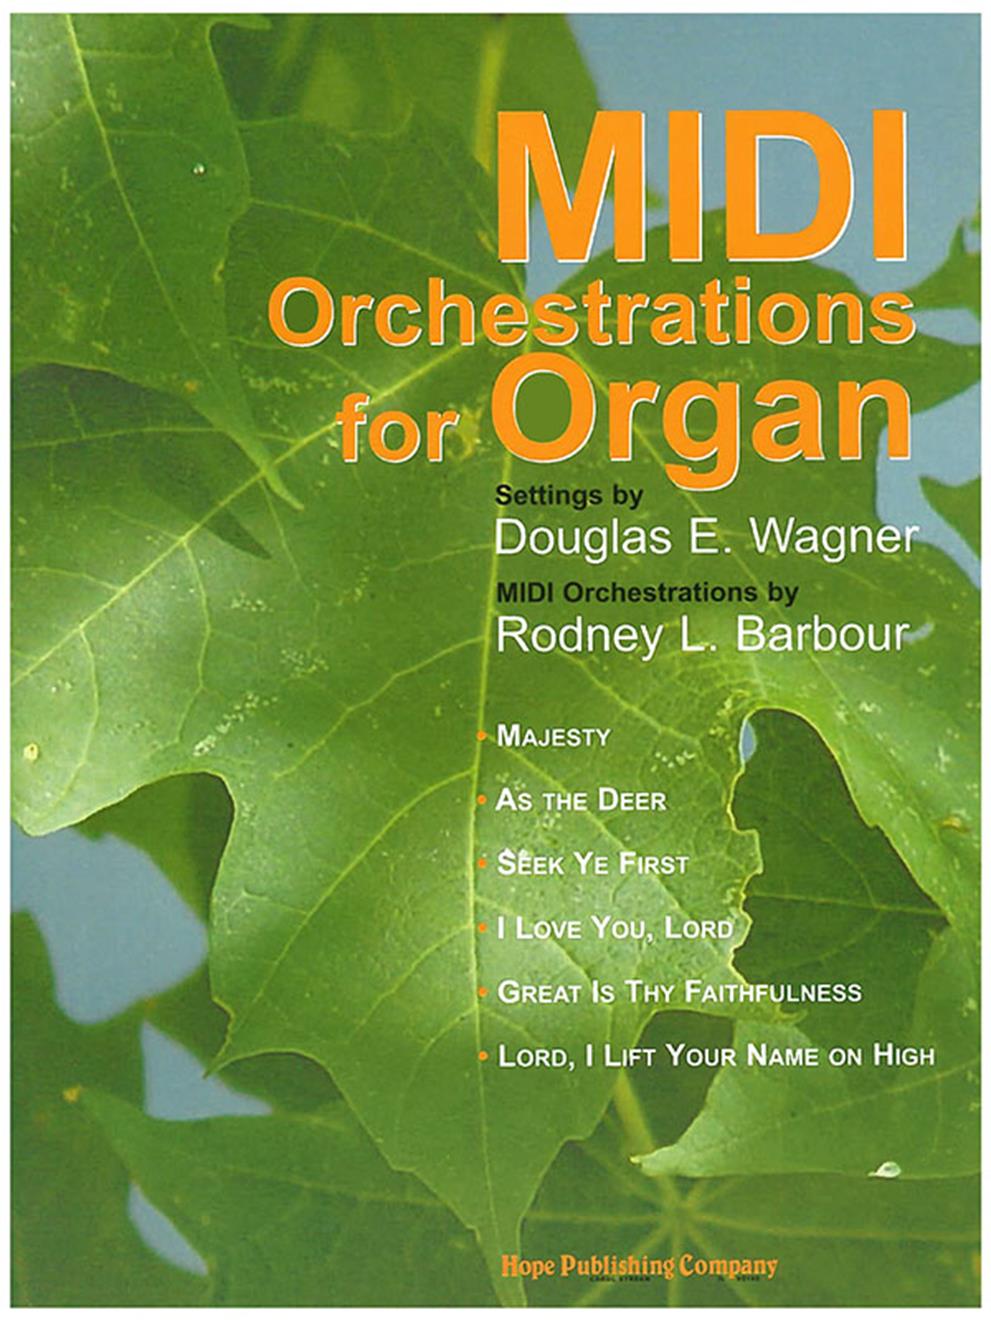 MIDI ORCHESTRATIONS FOR ORGAN - Cover Image